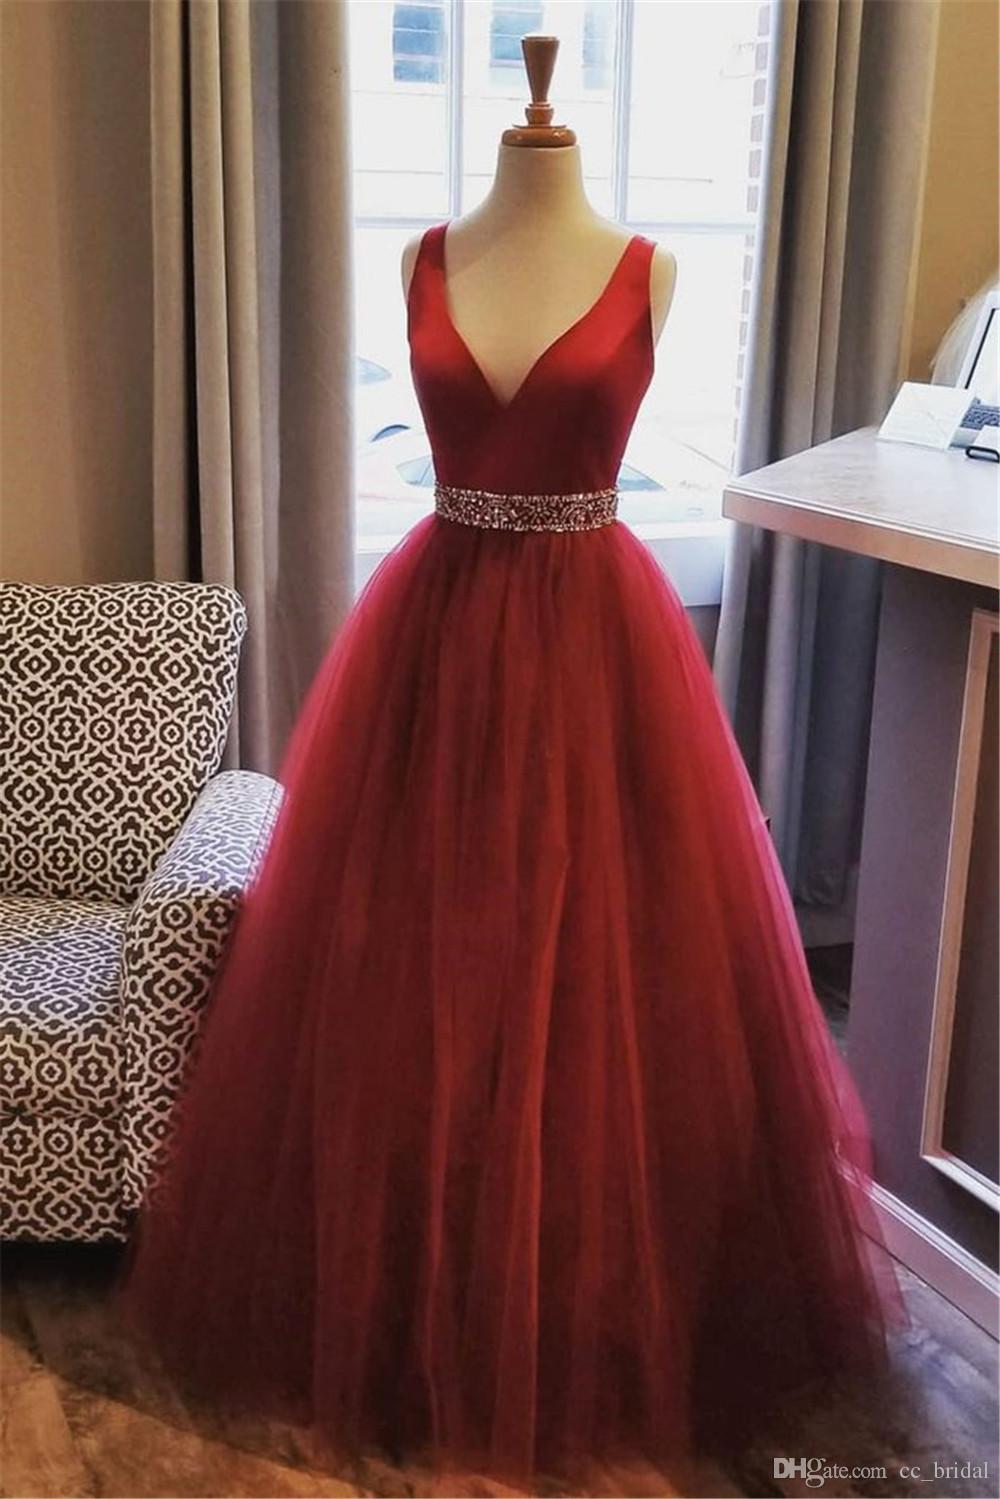 Sexy V-neck Red Tulle Long Prom Dress Beading Sequin A Line Women Evening Dress, Plus Size Prom Party Gowns,women Pageant Gowns